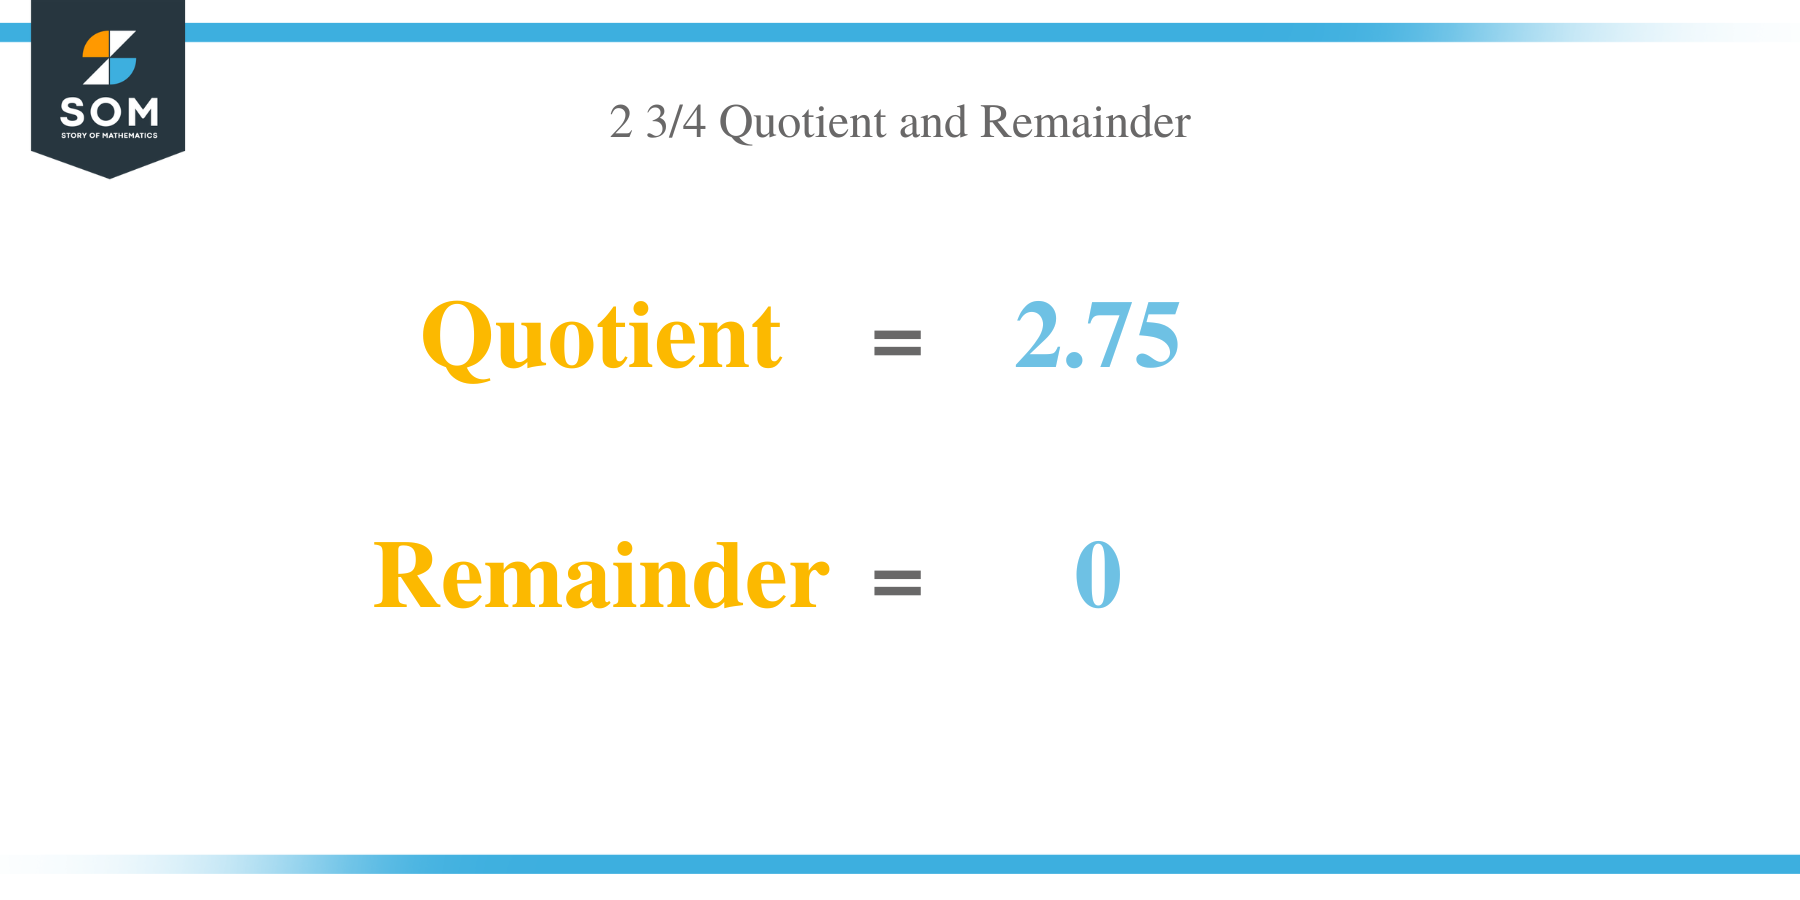 Quotient and Remainer of 2 3 per 4